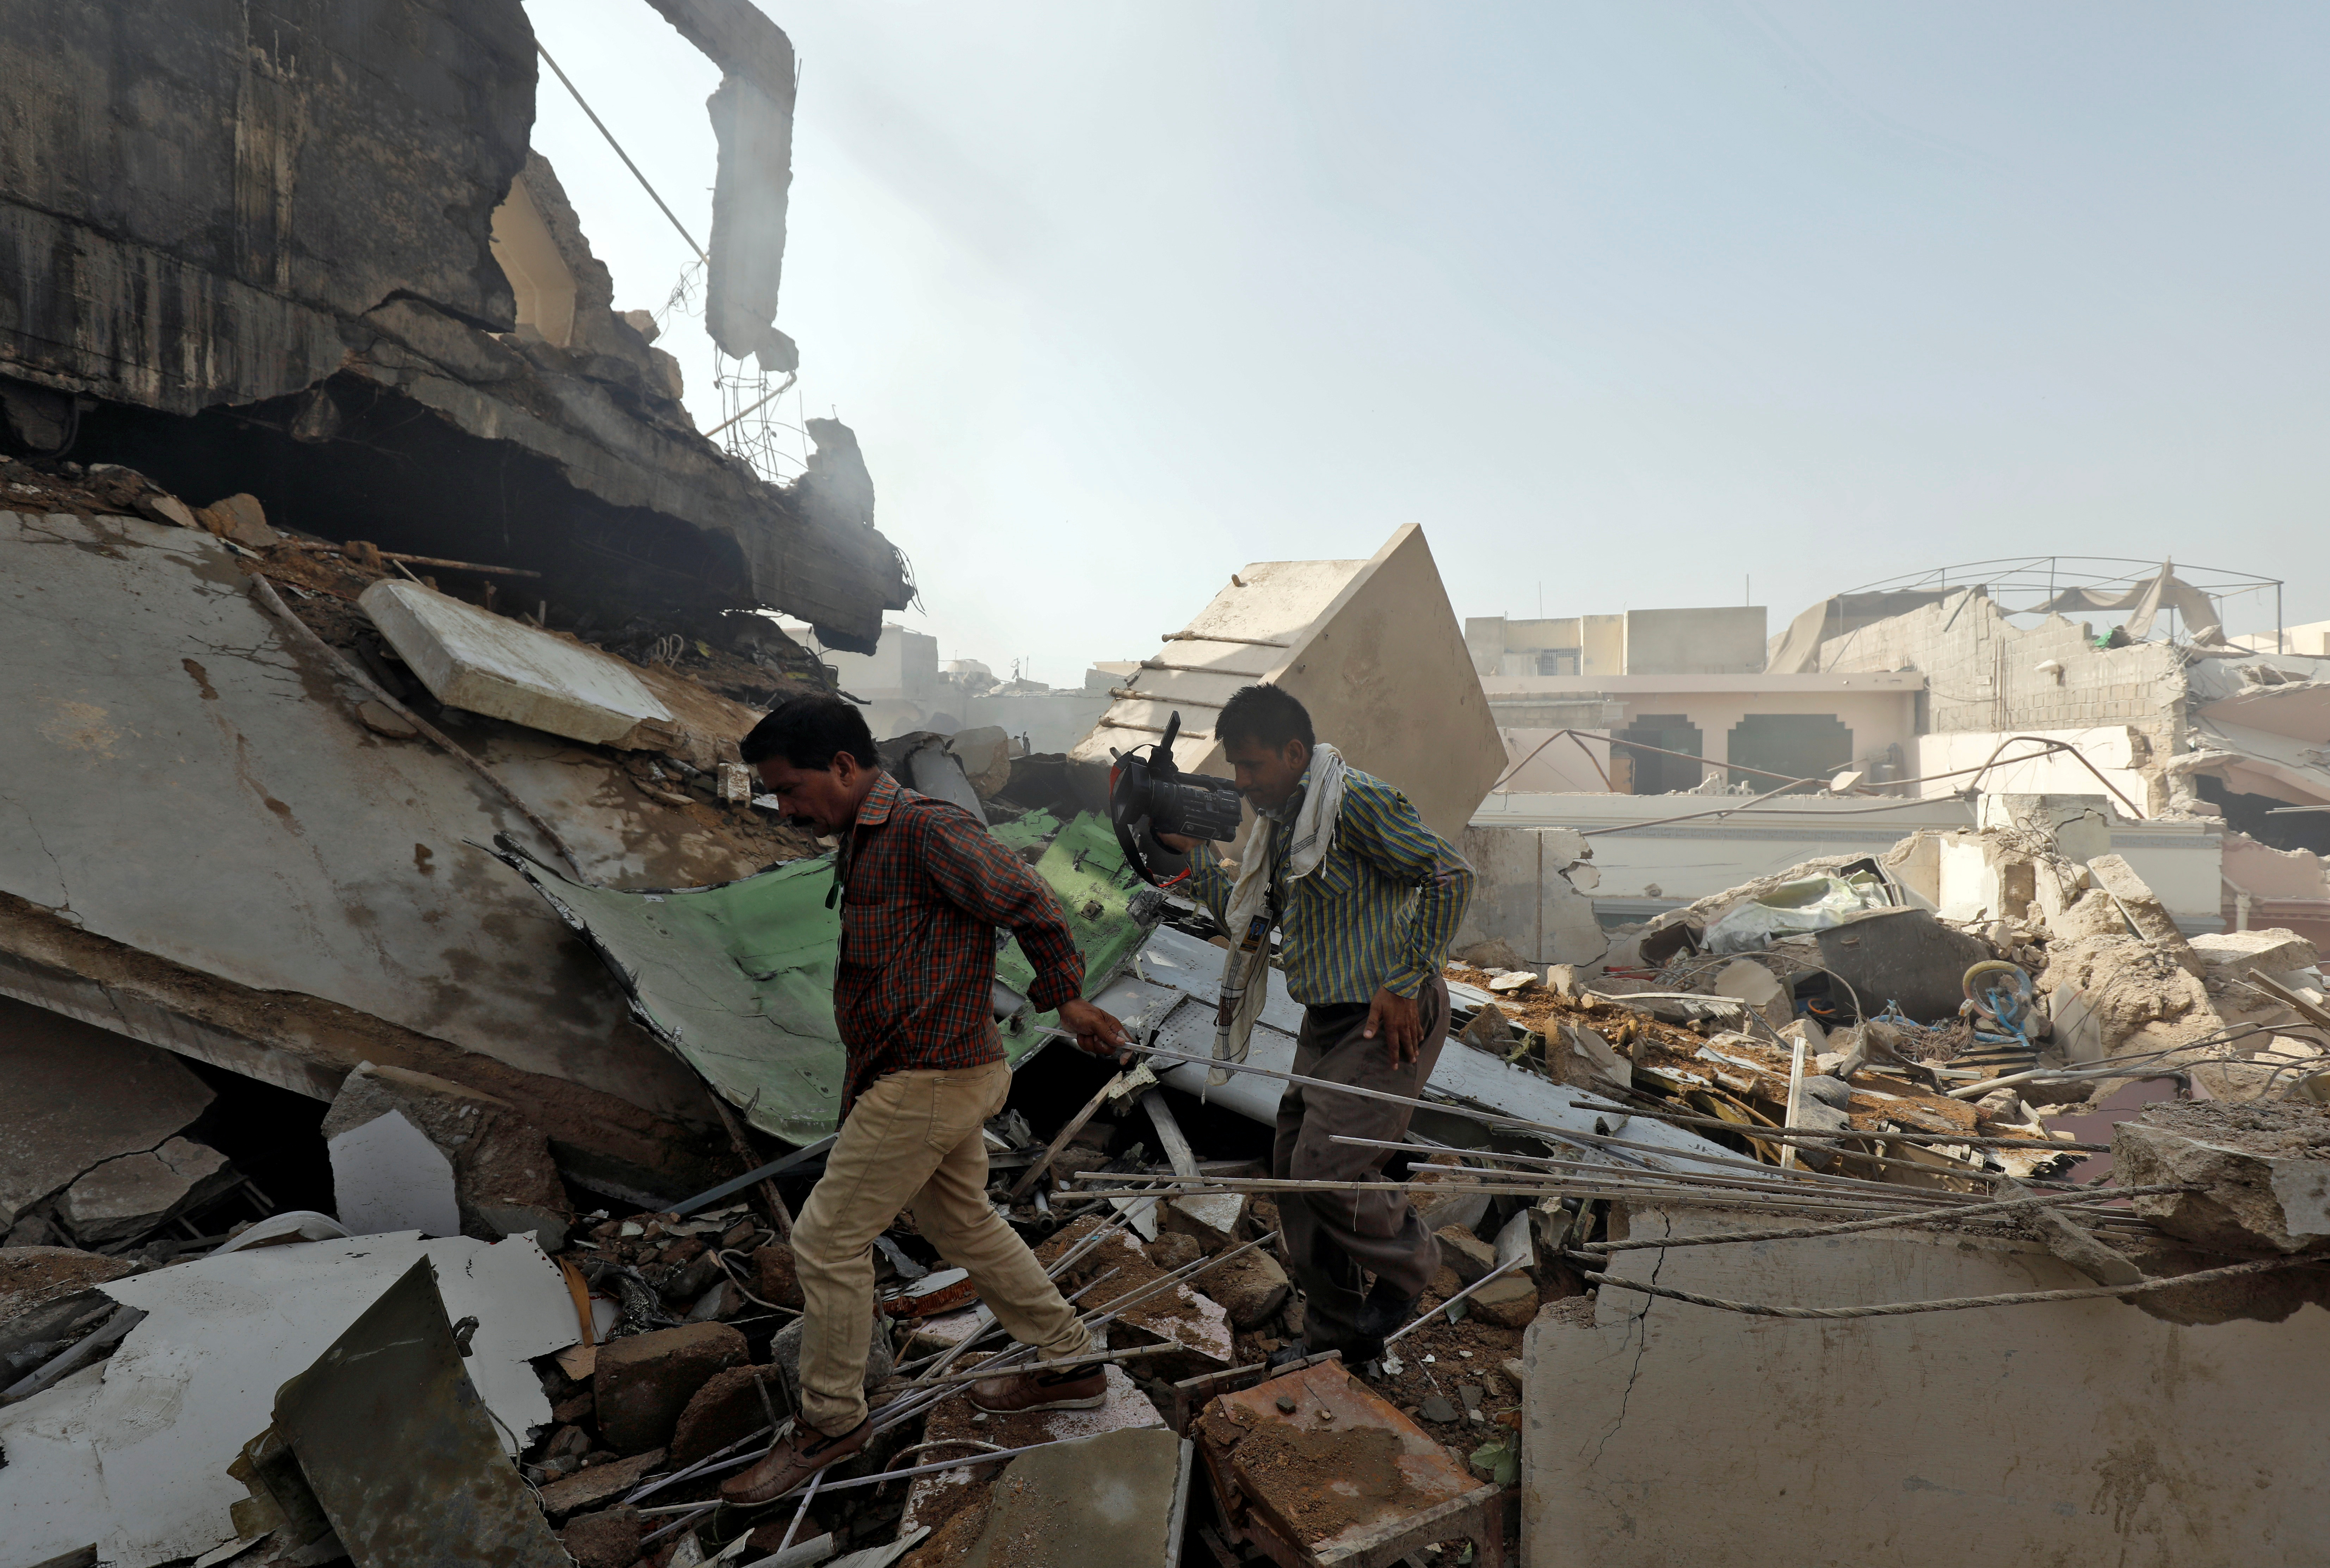 Men walk on the debris at the site of a passenger plane crash in a residential area near an airport in Karachi, Pakistan May 22, 2020. REUTERS/Akhtar Soomro - RC2OTG9SHZGA